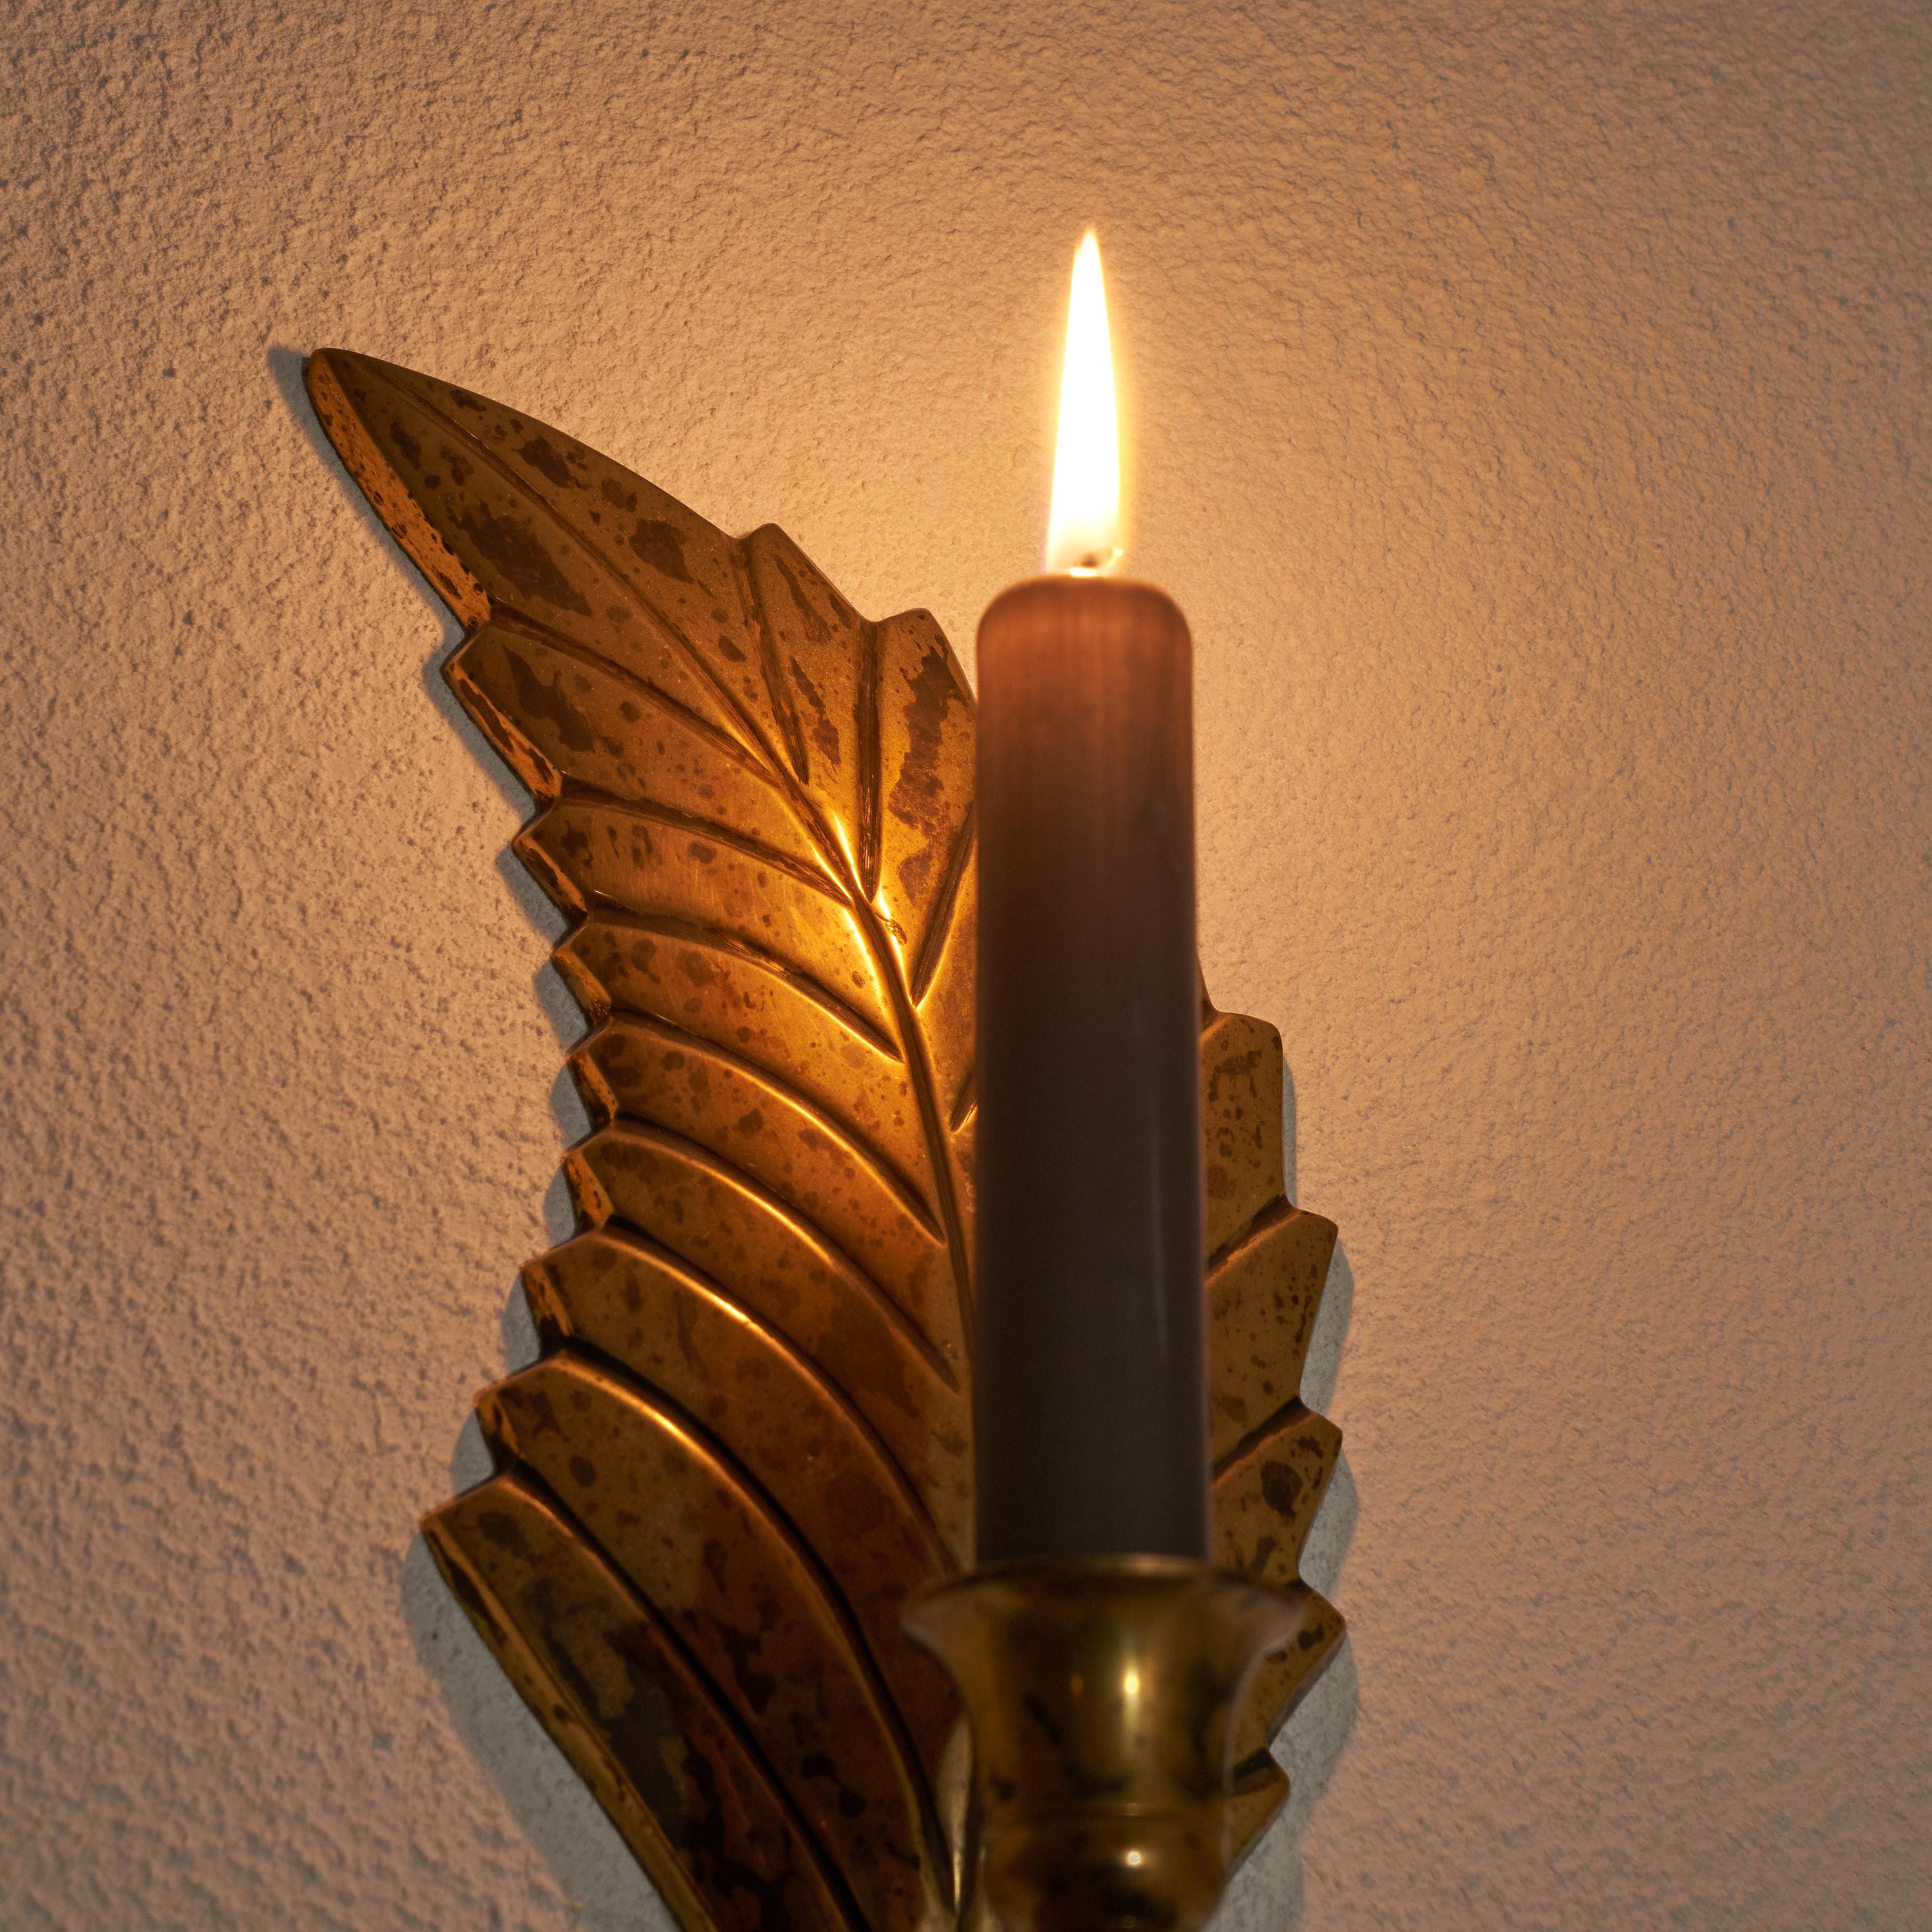 20th Century Leaf Shaped Candle Sconce in Patinated Brass 1970s For Sale